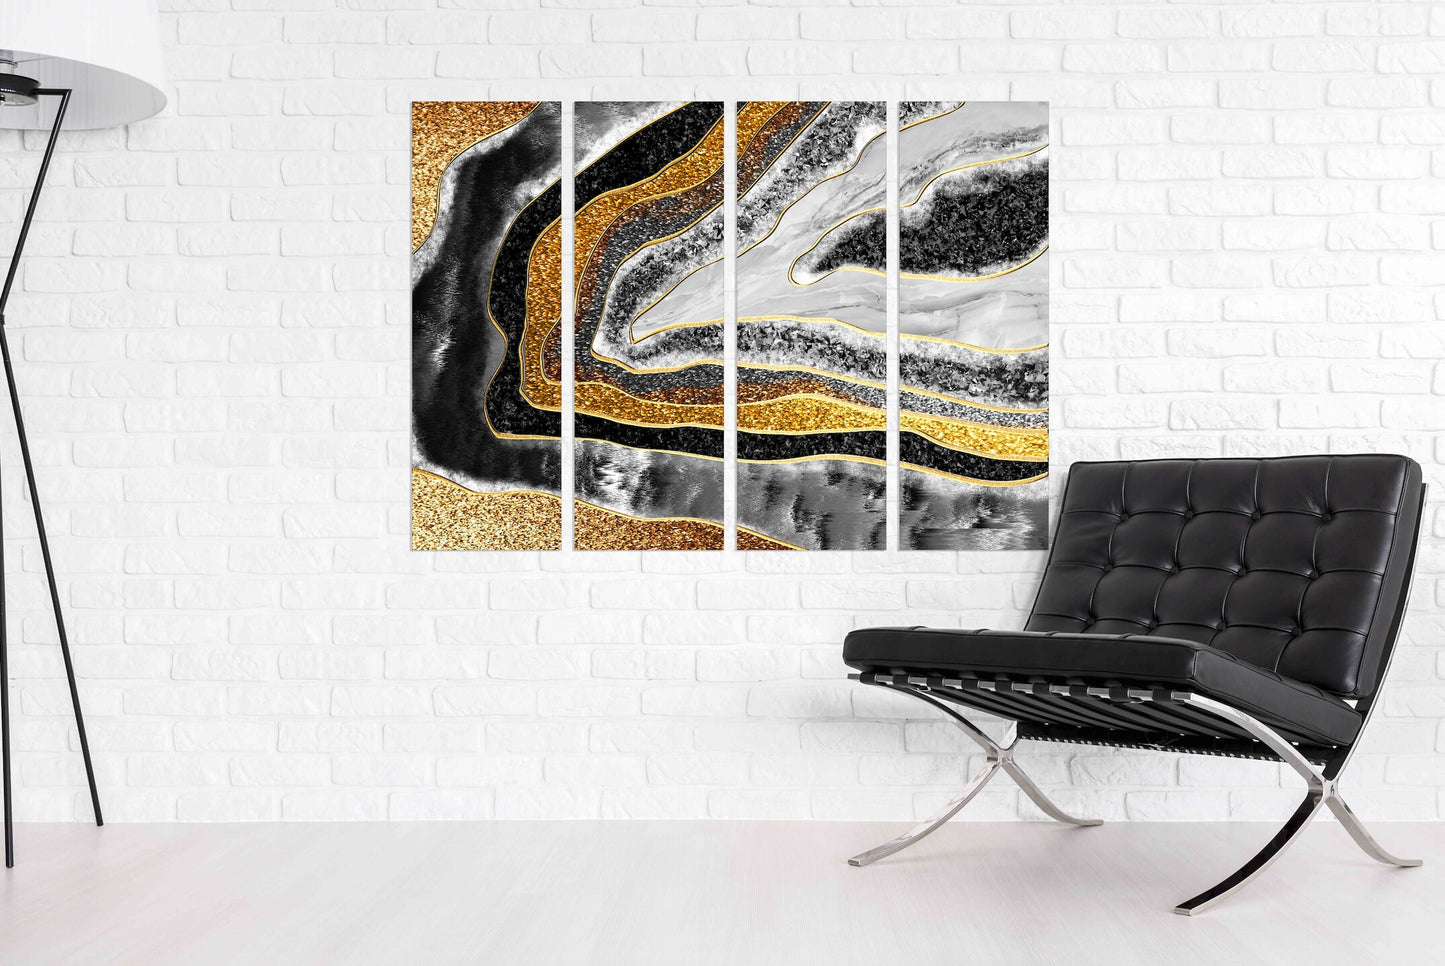 Marble decor Home wall decor 3 piece frame canvas painting large Modern abstract art Expressionist painting Abstract wall art